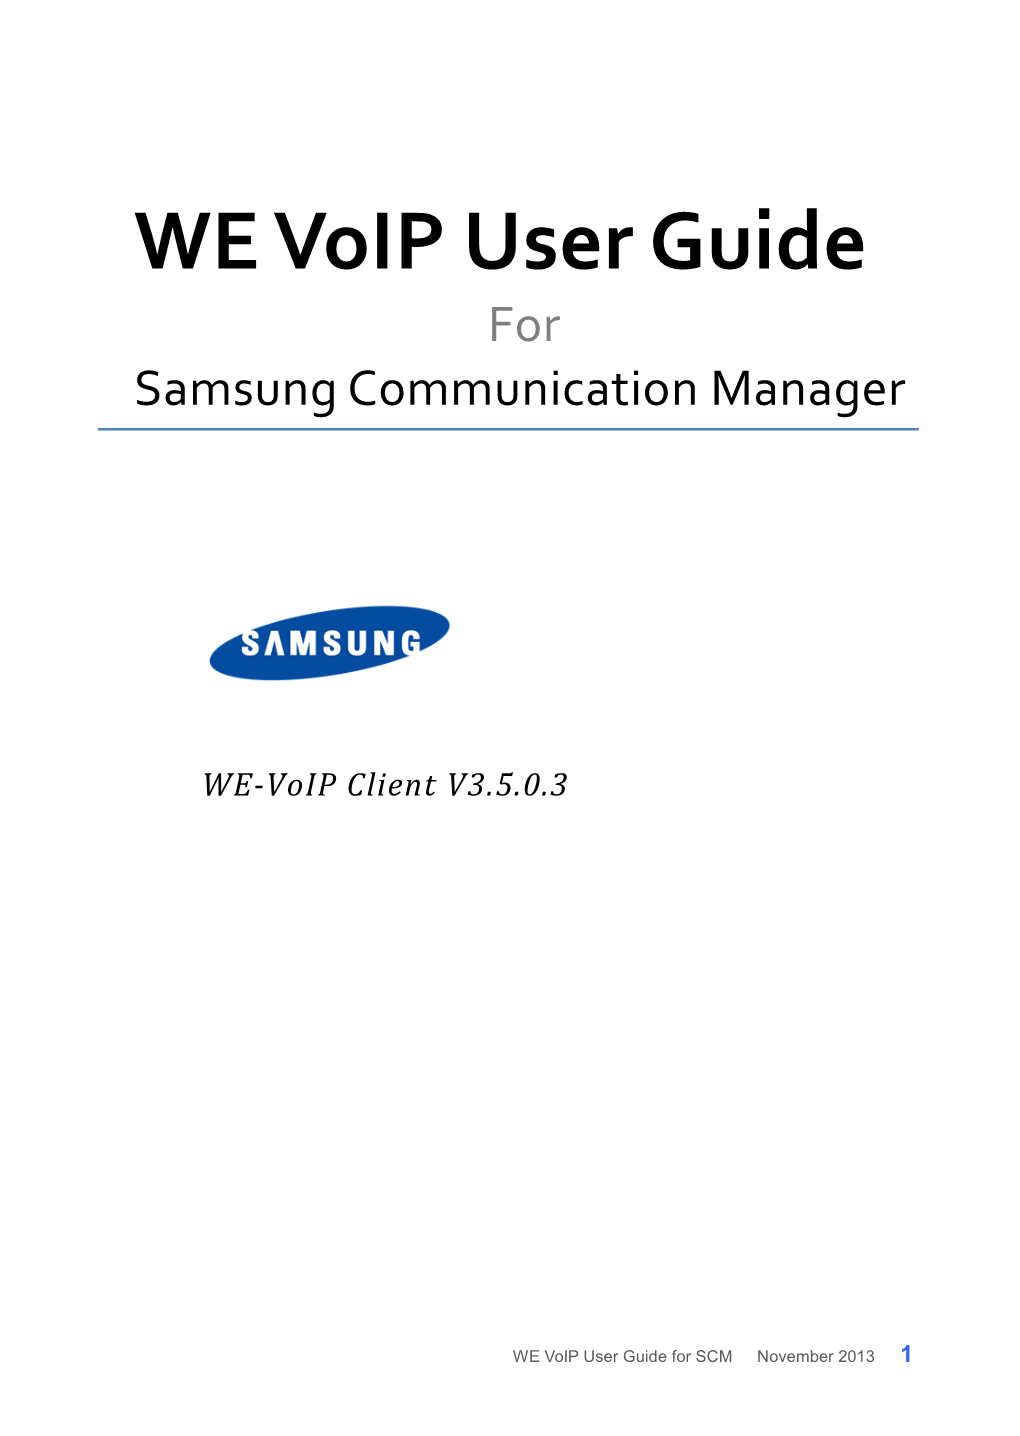 Samsung WE Voip User Guide For